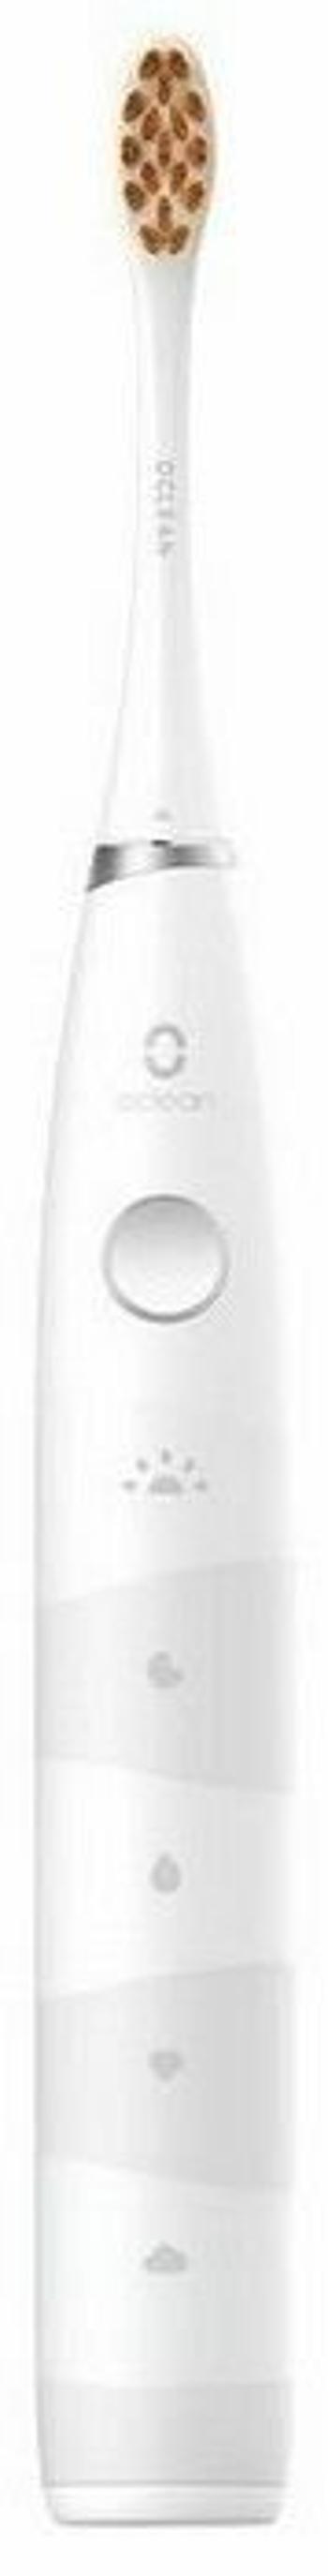 Oclean Oclean Flow Smart Electric Toothbrush White